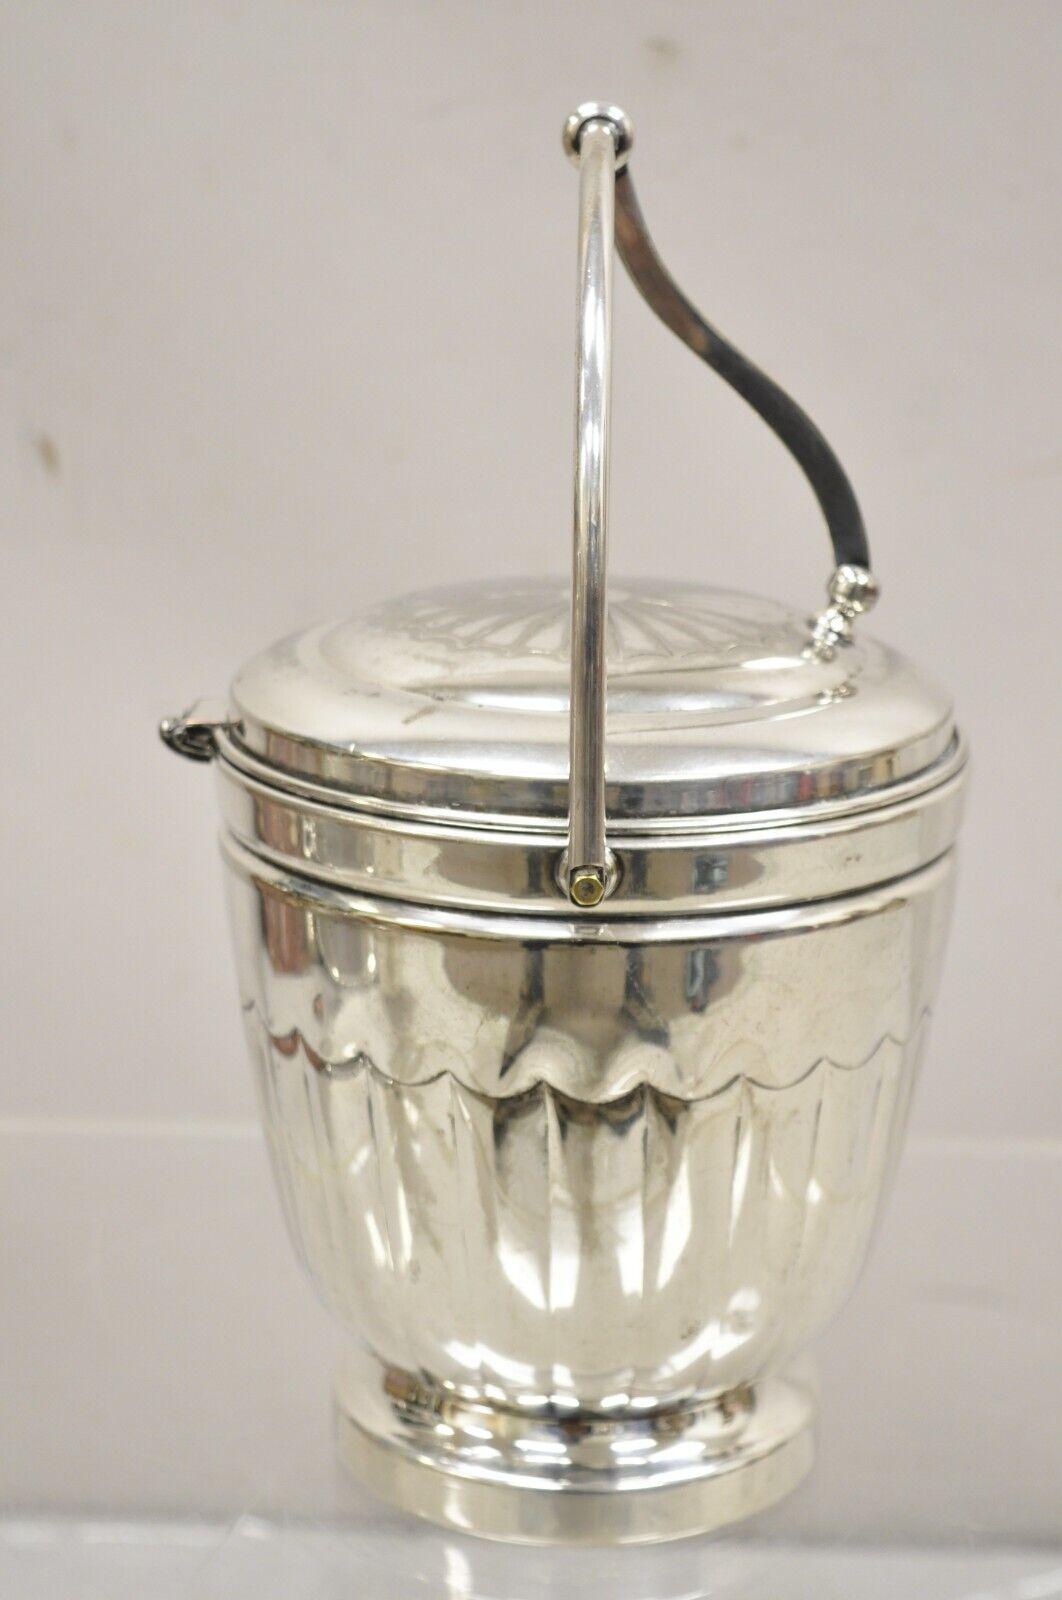 Vintage English Sheridan Silver Plated Reticulated Hinge Lid Ice Bucket. Item features glass lined interior original hallmark..
Circa Mid to late 20th Century. Measurements: 13